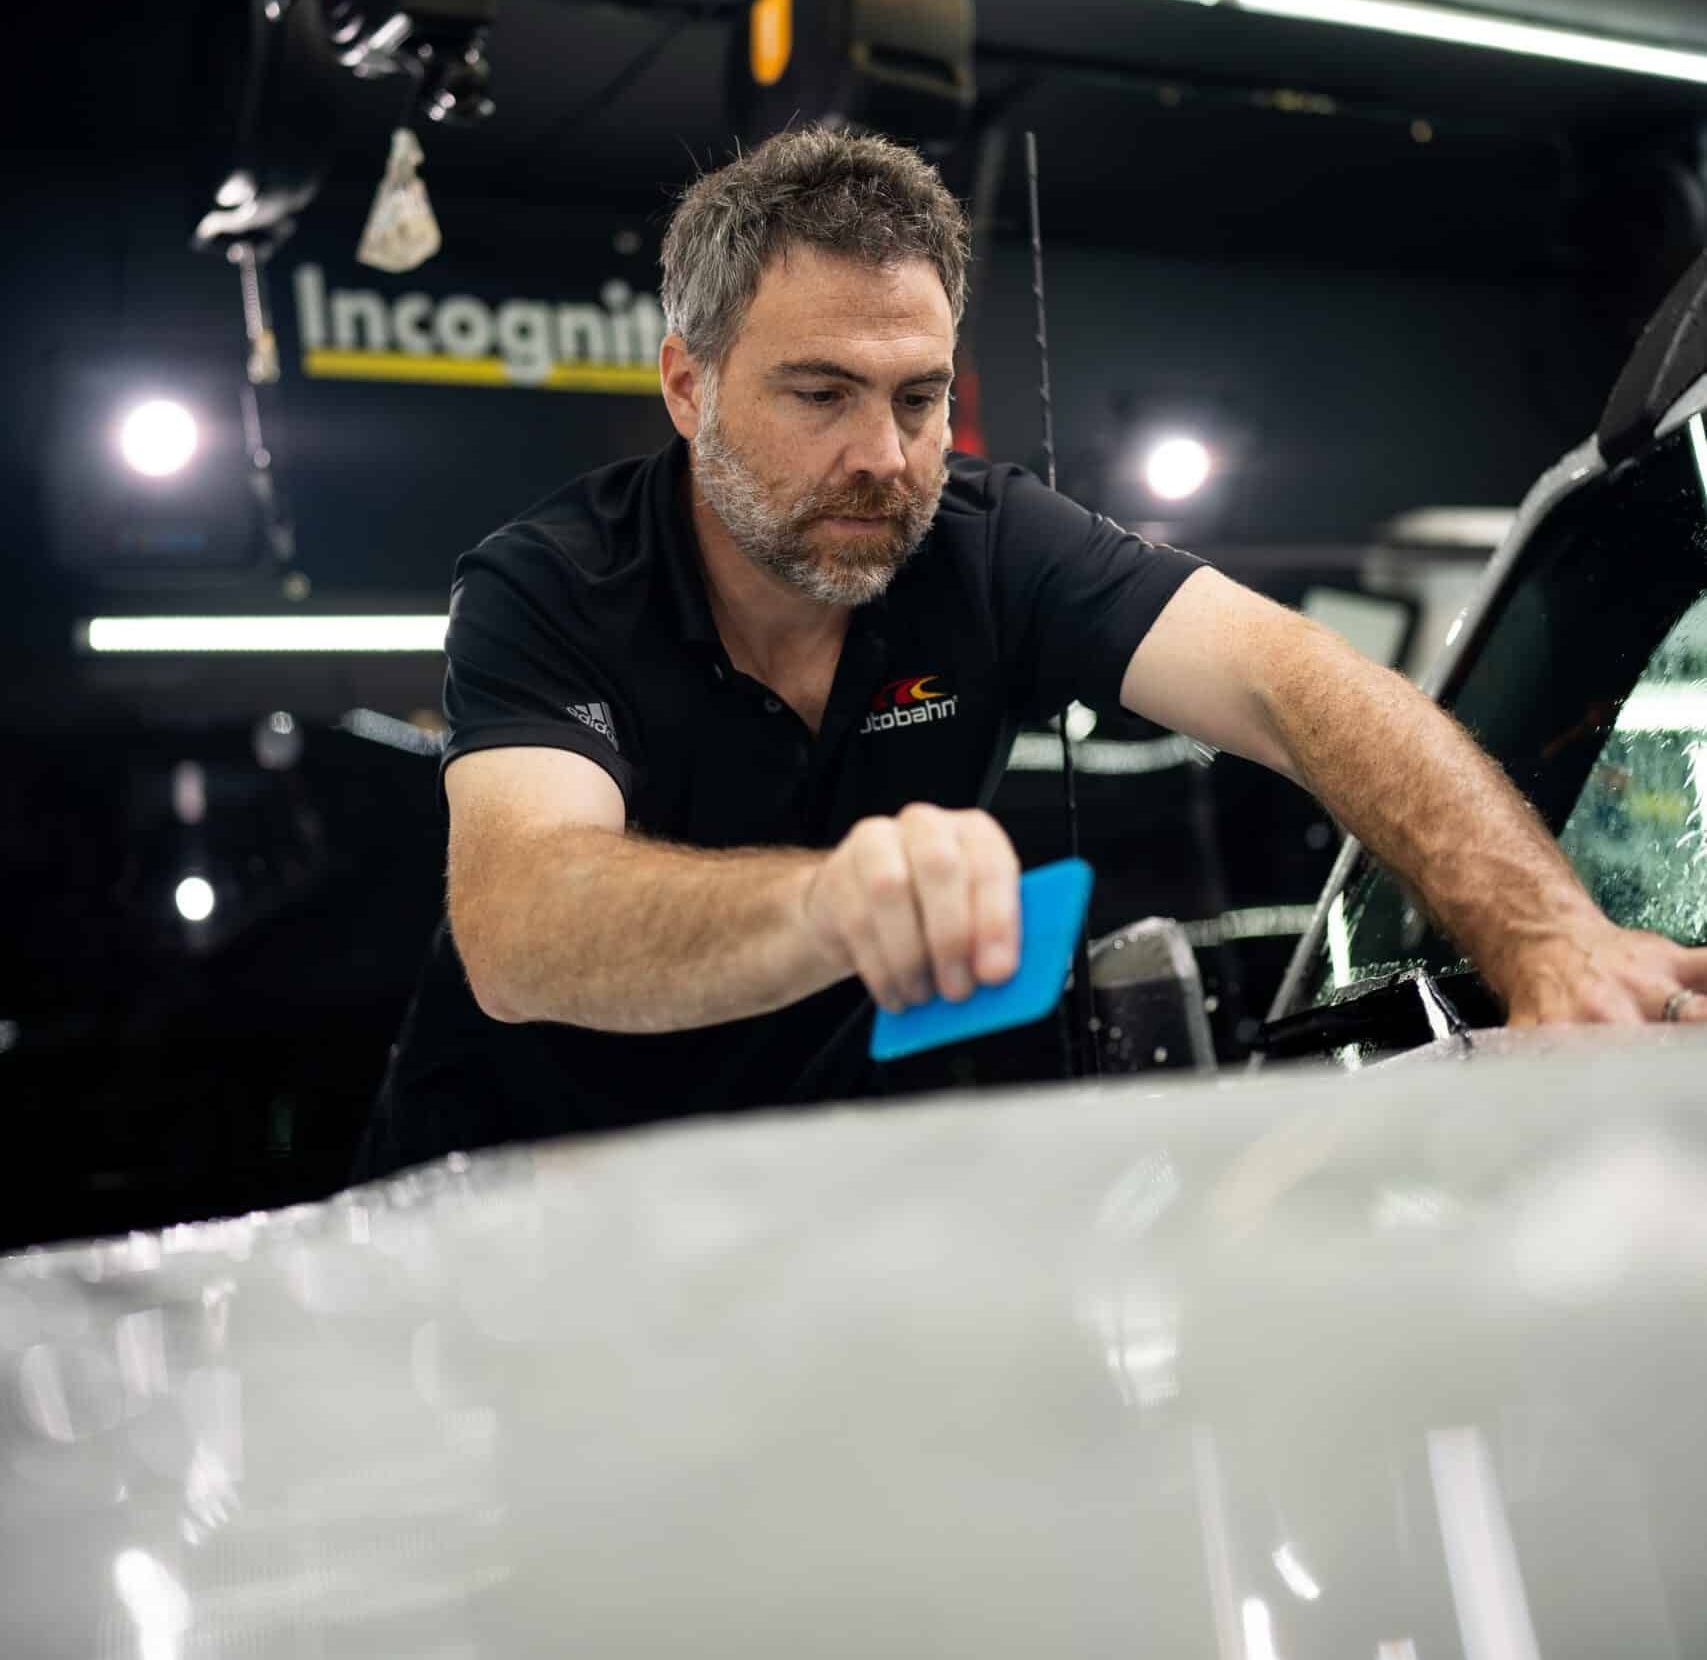 A man in a black shirt is working on a car in front of a sign that says incognito